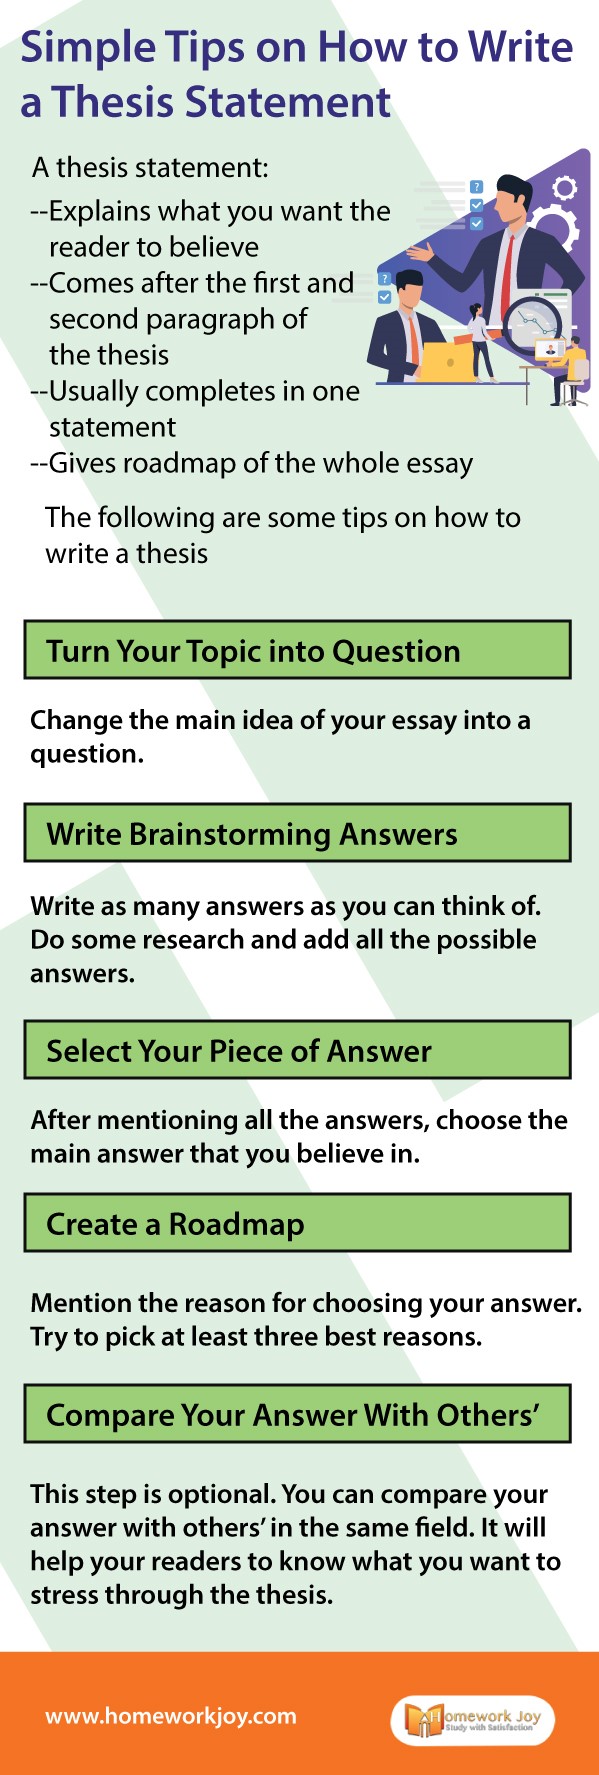 tips in writing a thesis statement